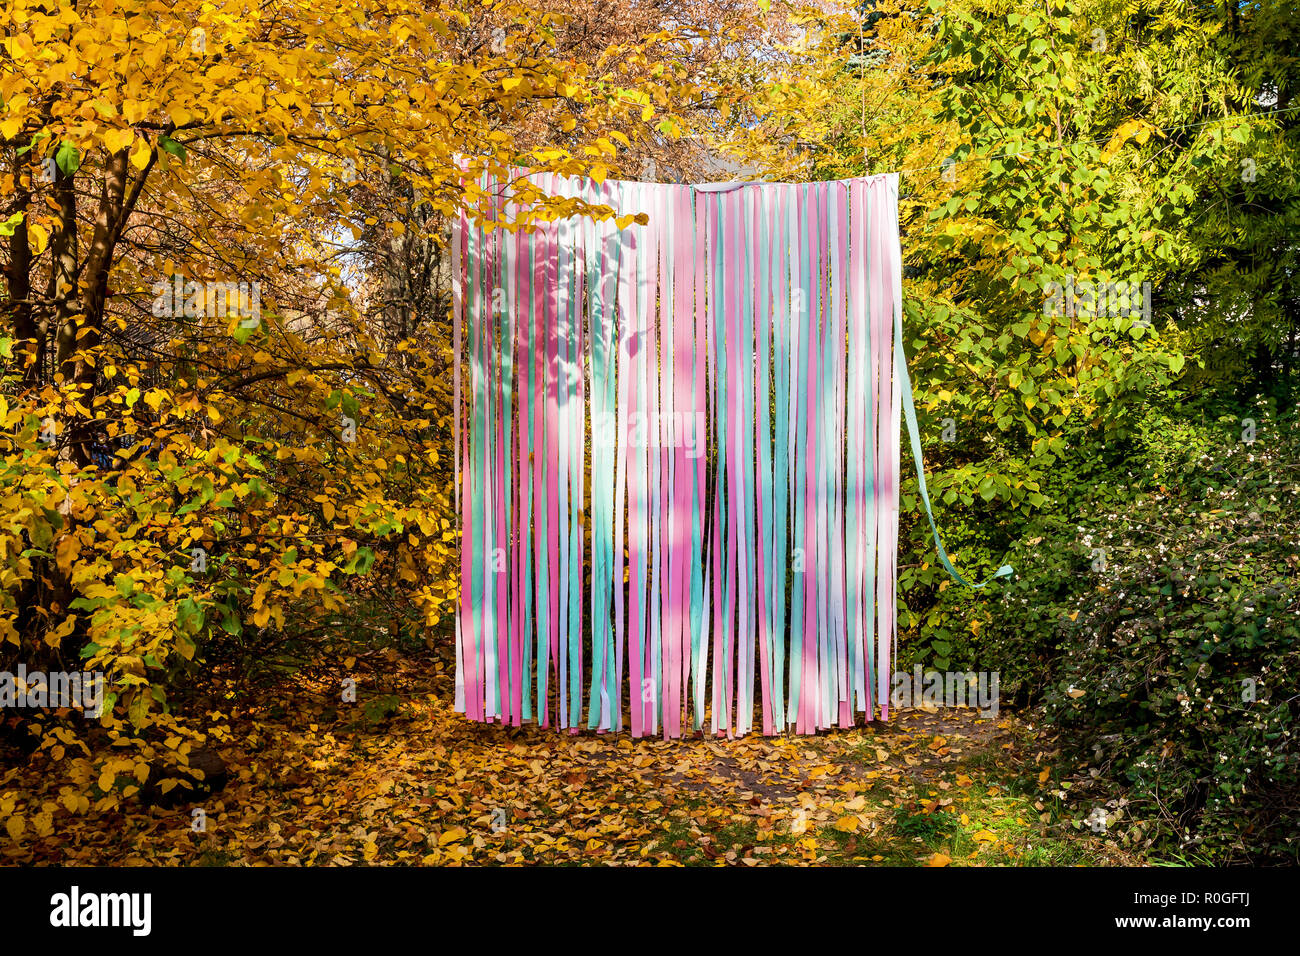 Festive Autumn Photo Zone On The Streets Of Multicolored Ribbons Free Space For Inscriptions Holiday Concept Stock Photo 224098466 Alamy